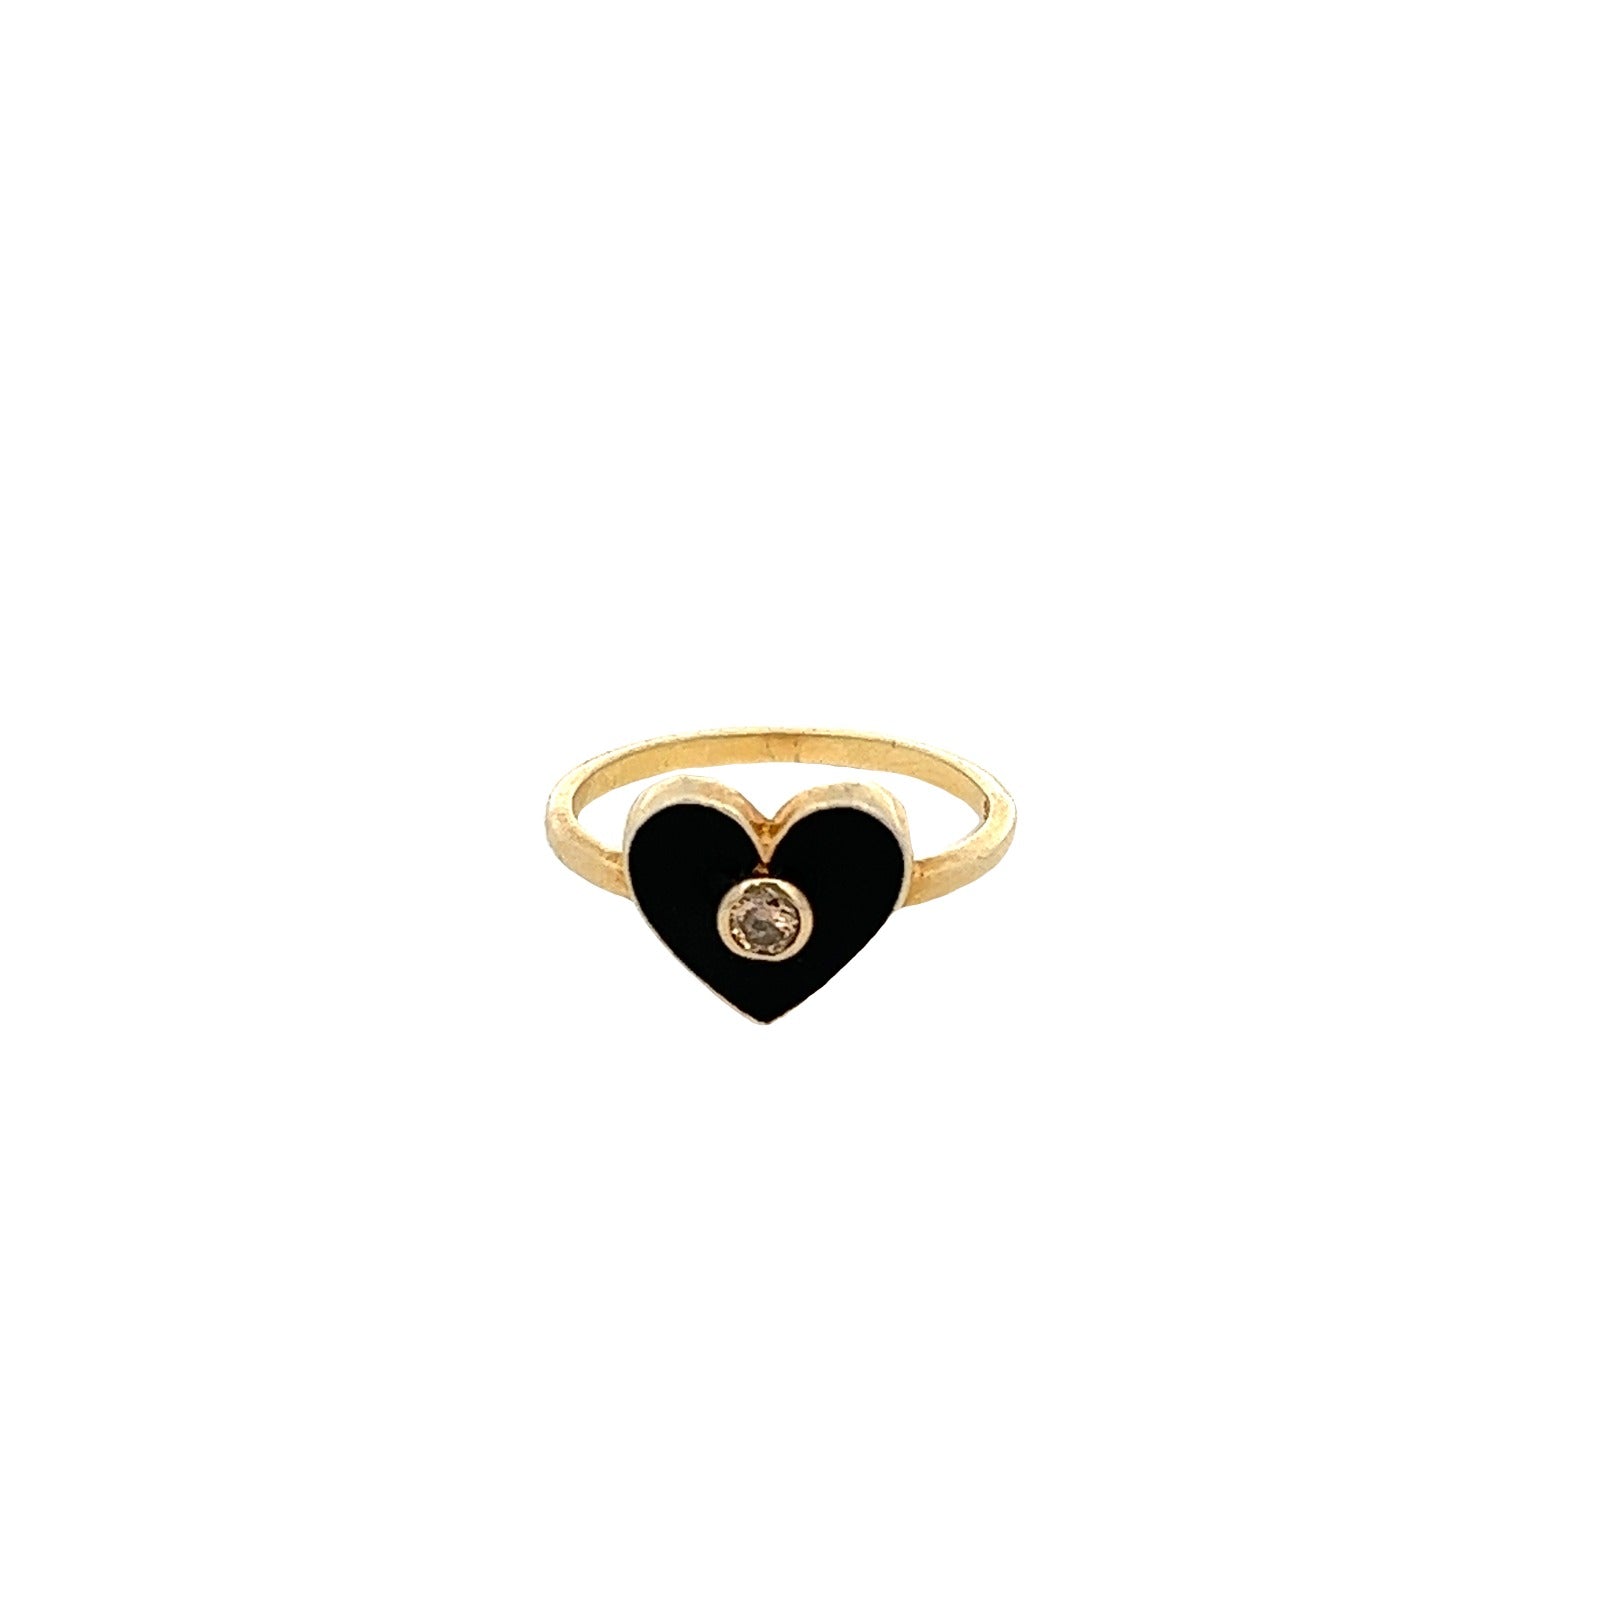 925 SILVER GOLD PLATED BLACK ENAMEL HEART RING